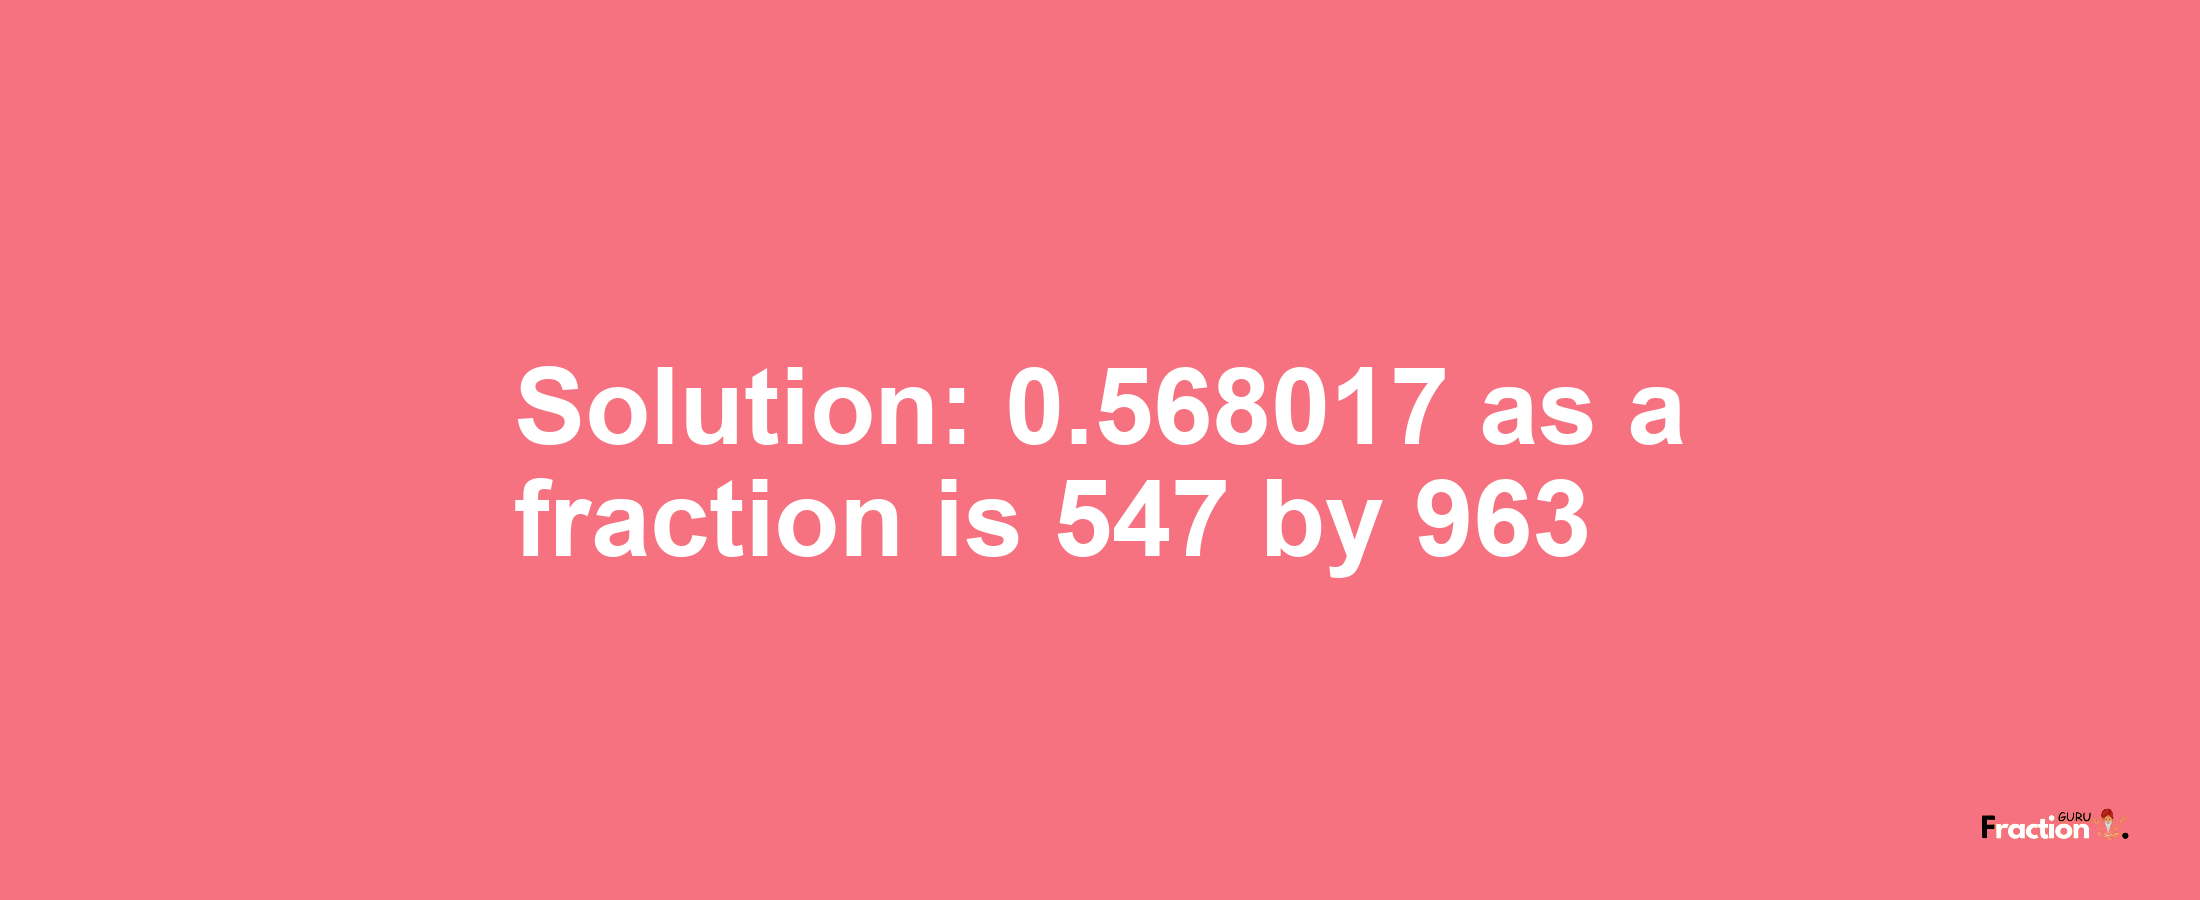 Solution:0.568017 as a fraction is 547/963